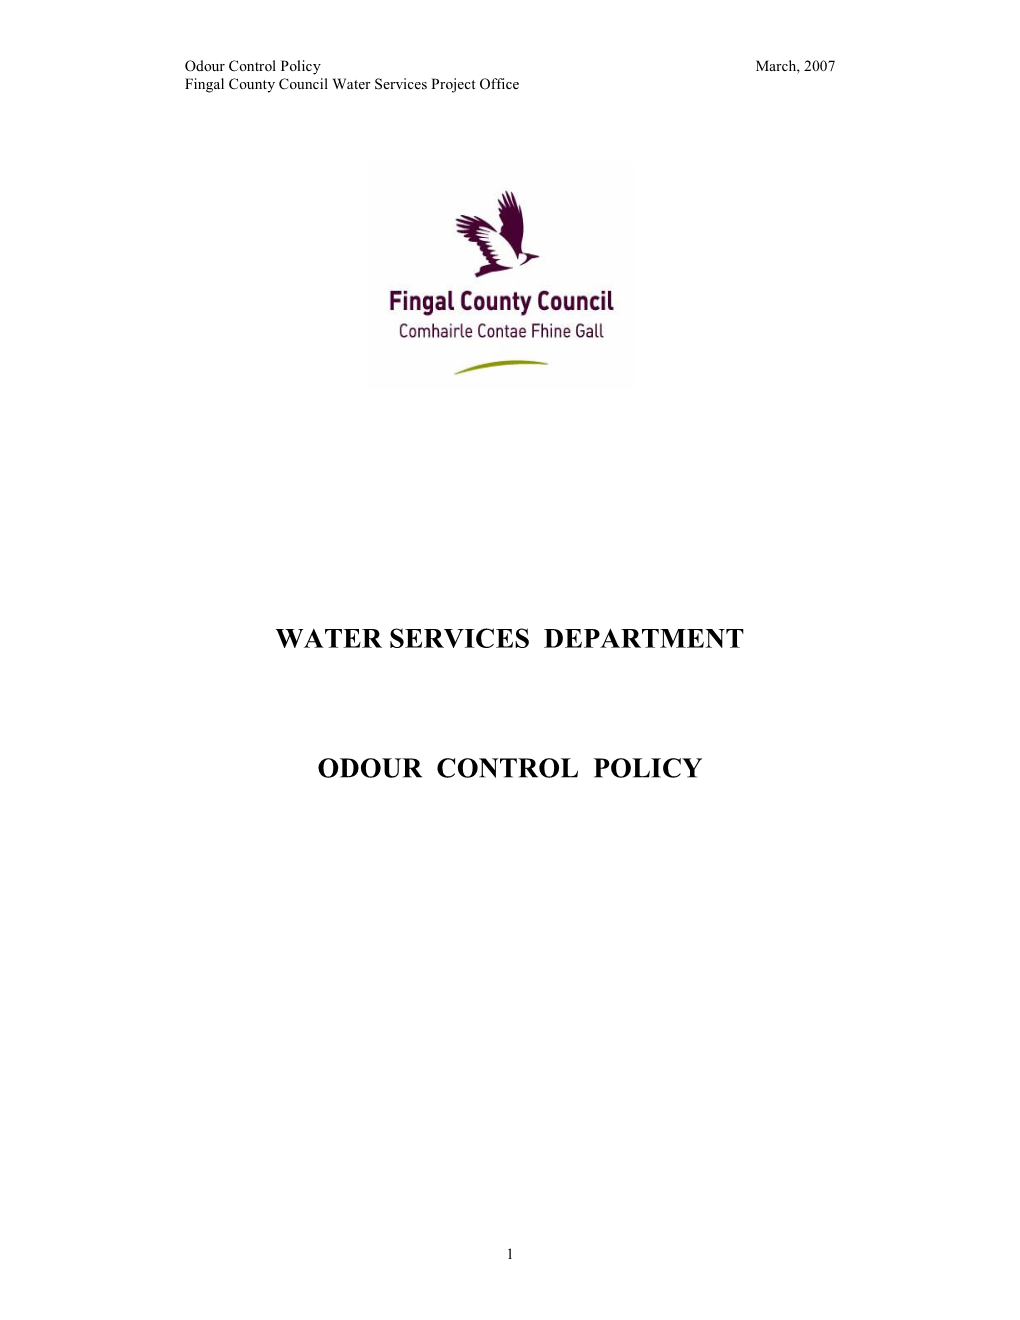 Water Services Department Odour Control Policy